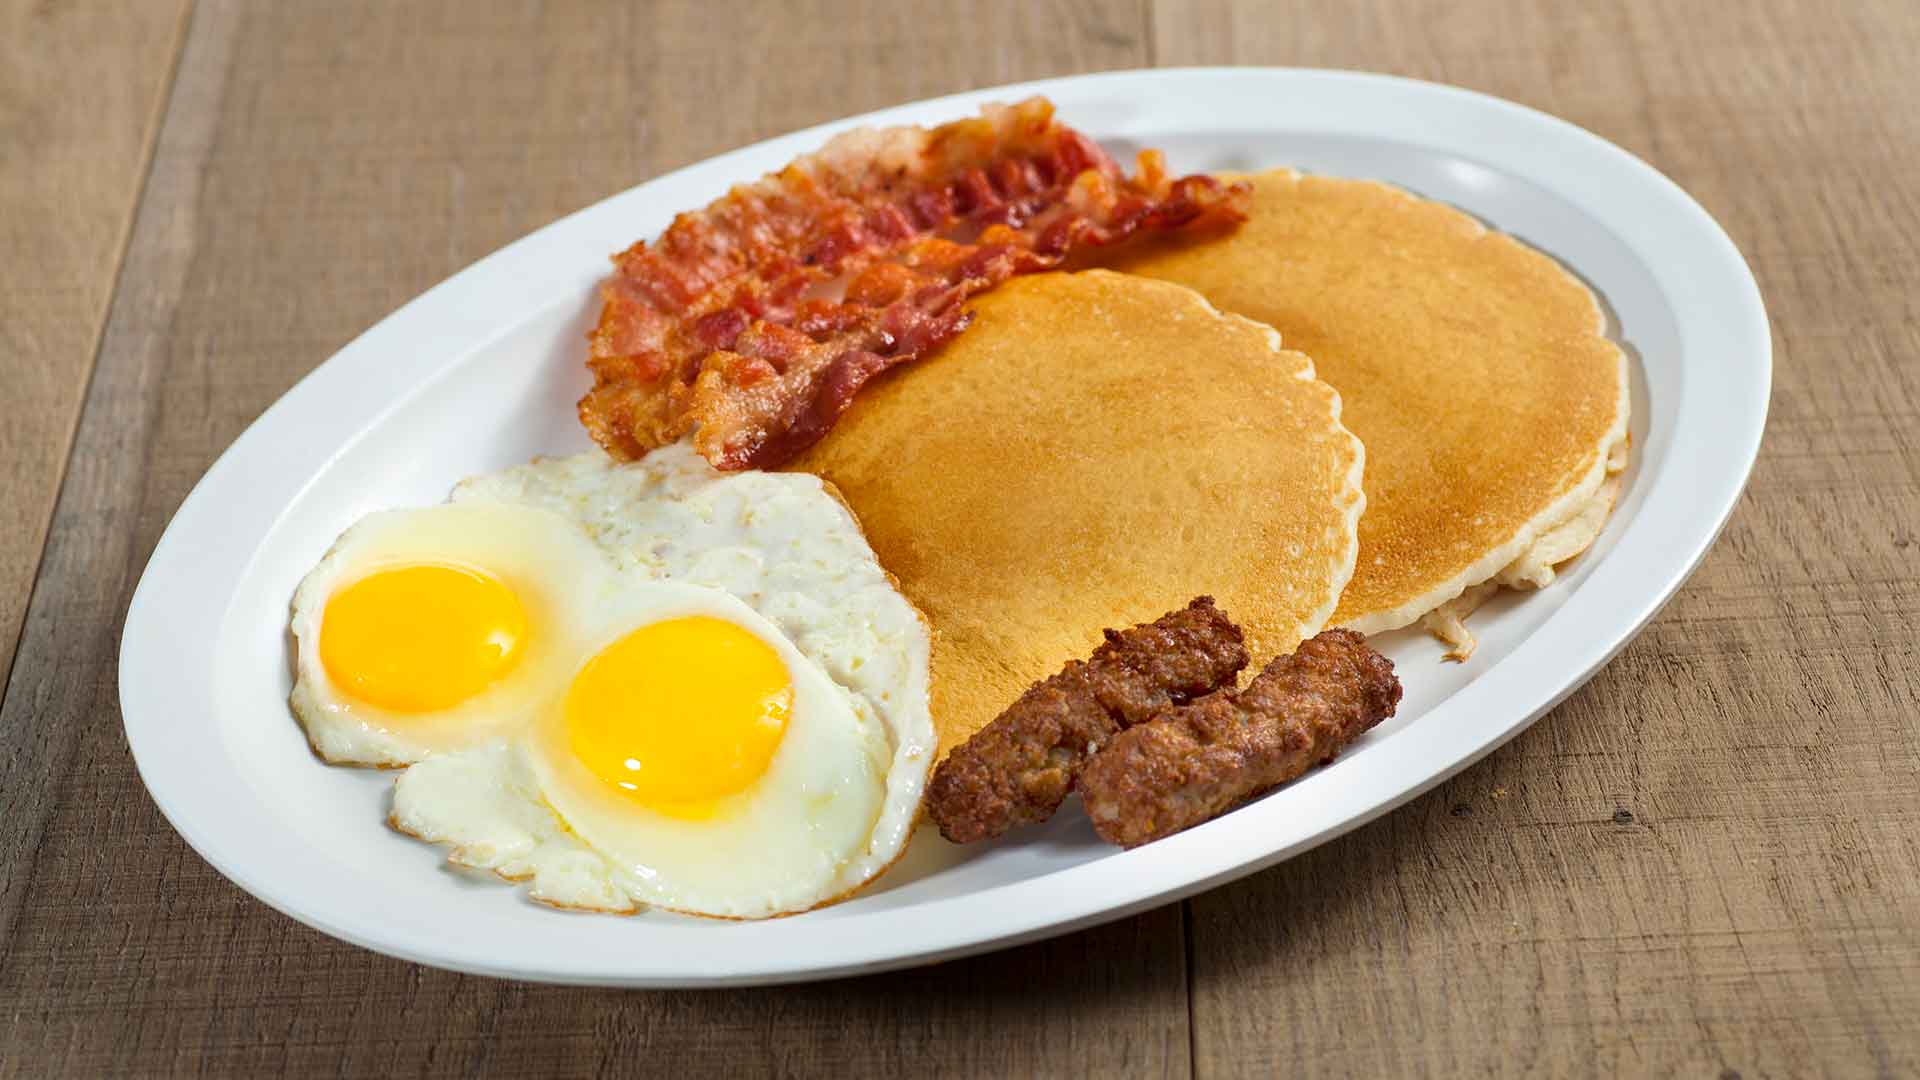 Breakfast platter of pancakes, eggs, bacon, and sausage.